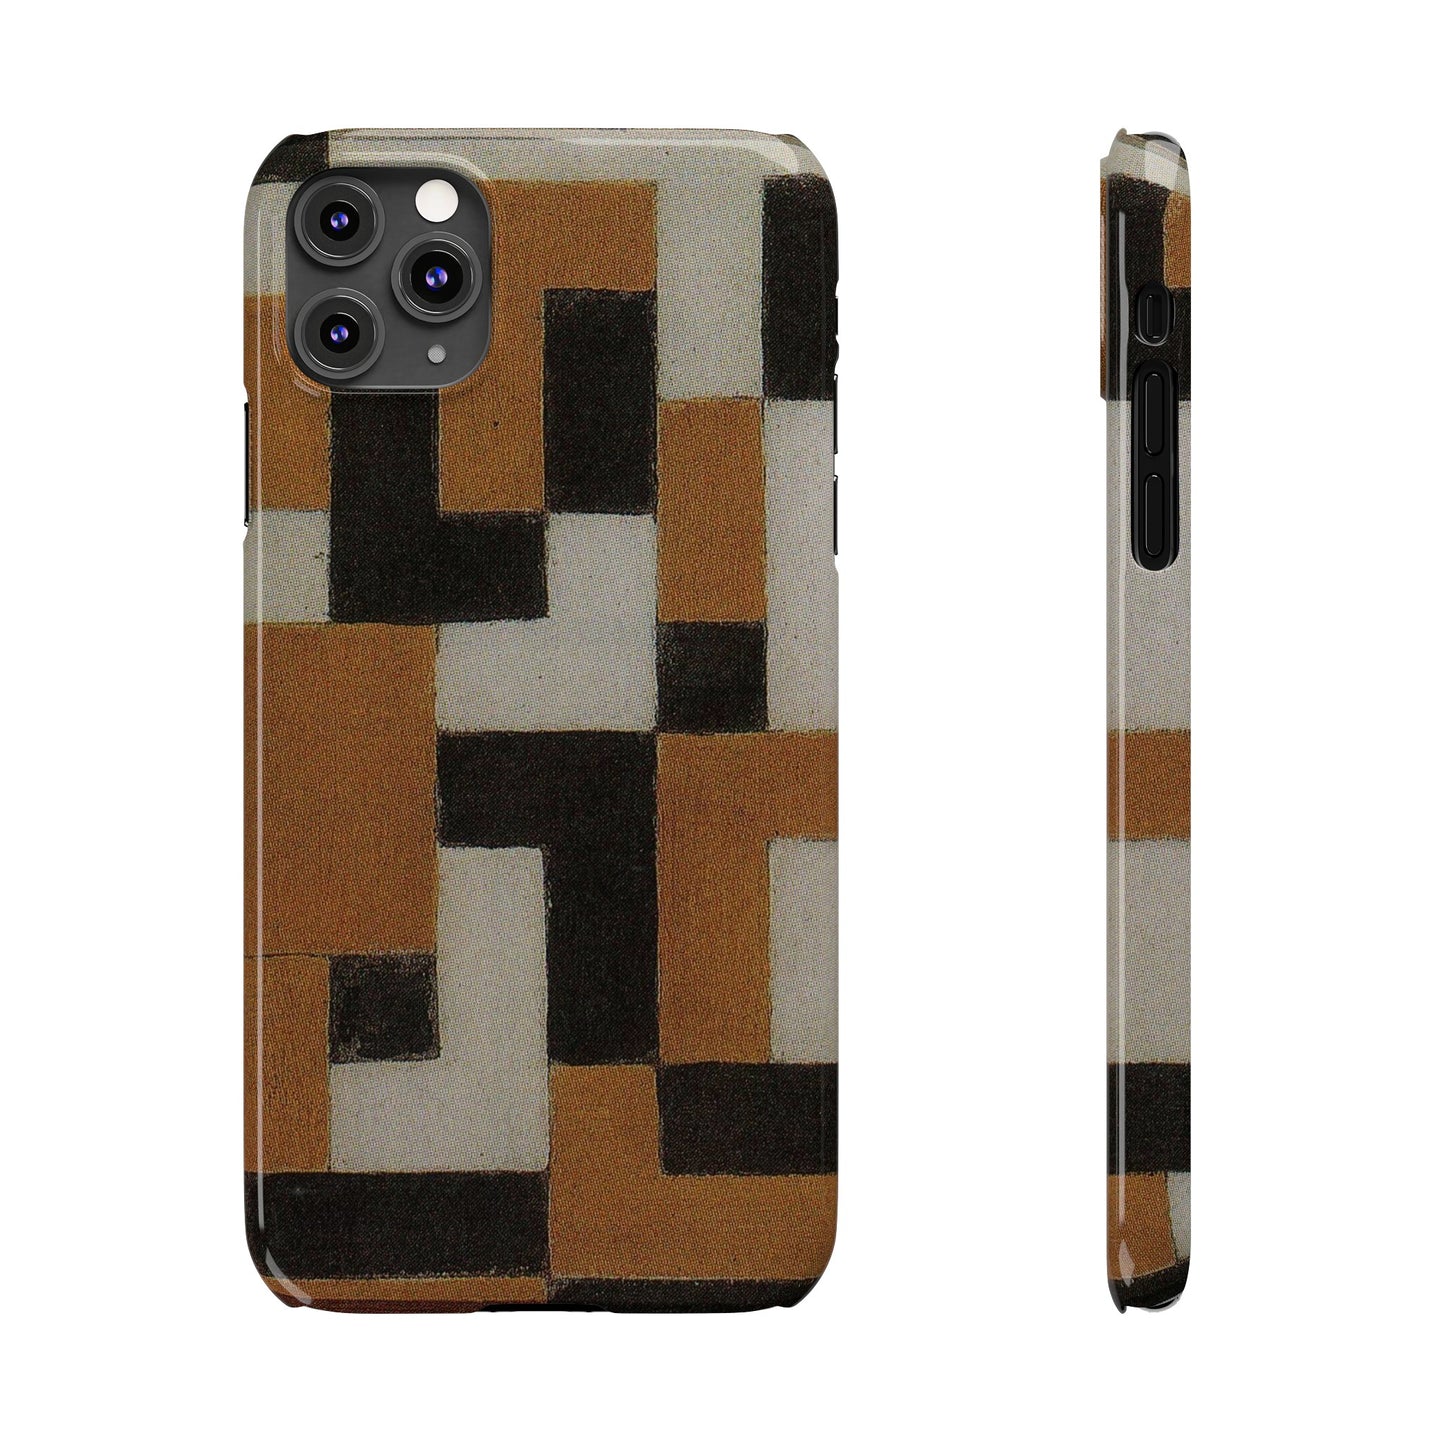 THEO VAN DOESBURG - COMPOSITION (1917 and 1918) - iPHONE SLIM CASE